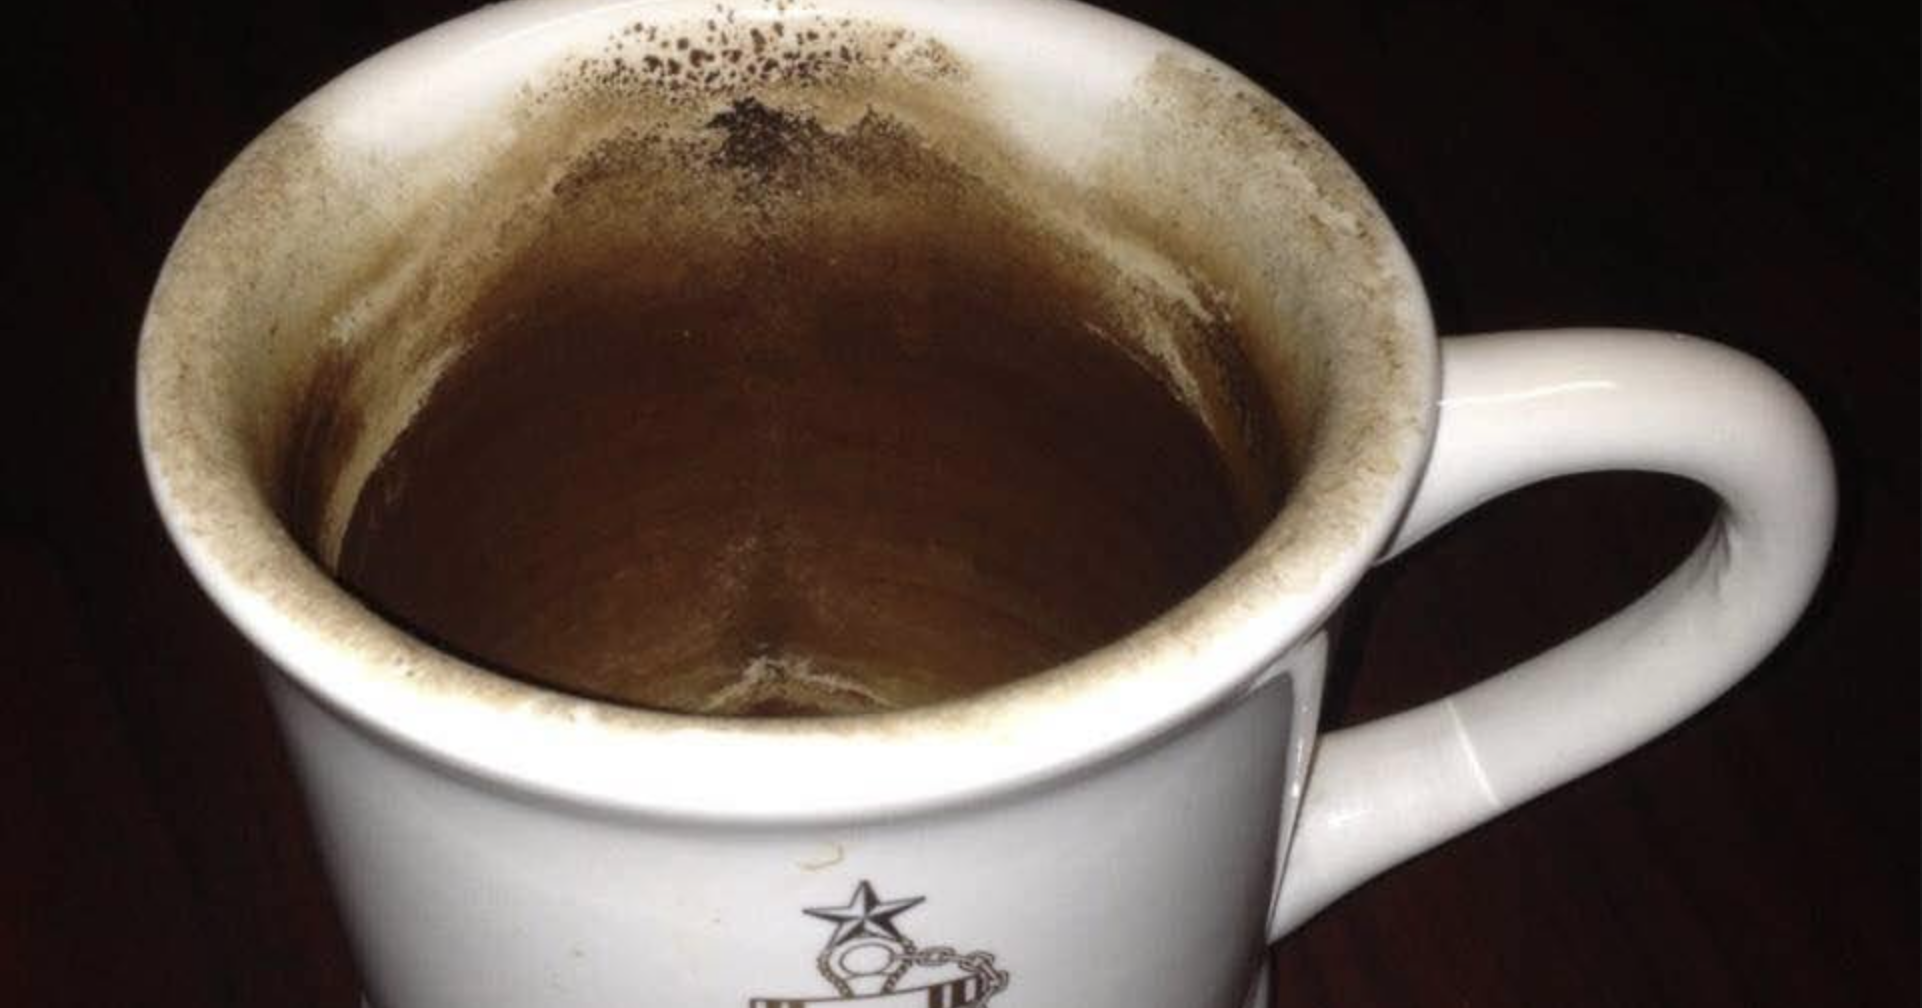 Why Sailors Love A Filthy Unwashed Coffee Mug